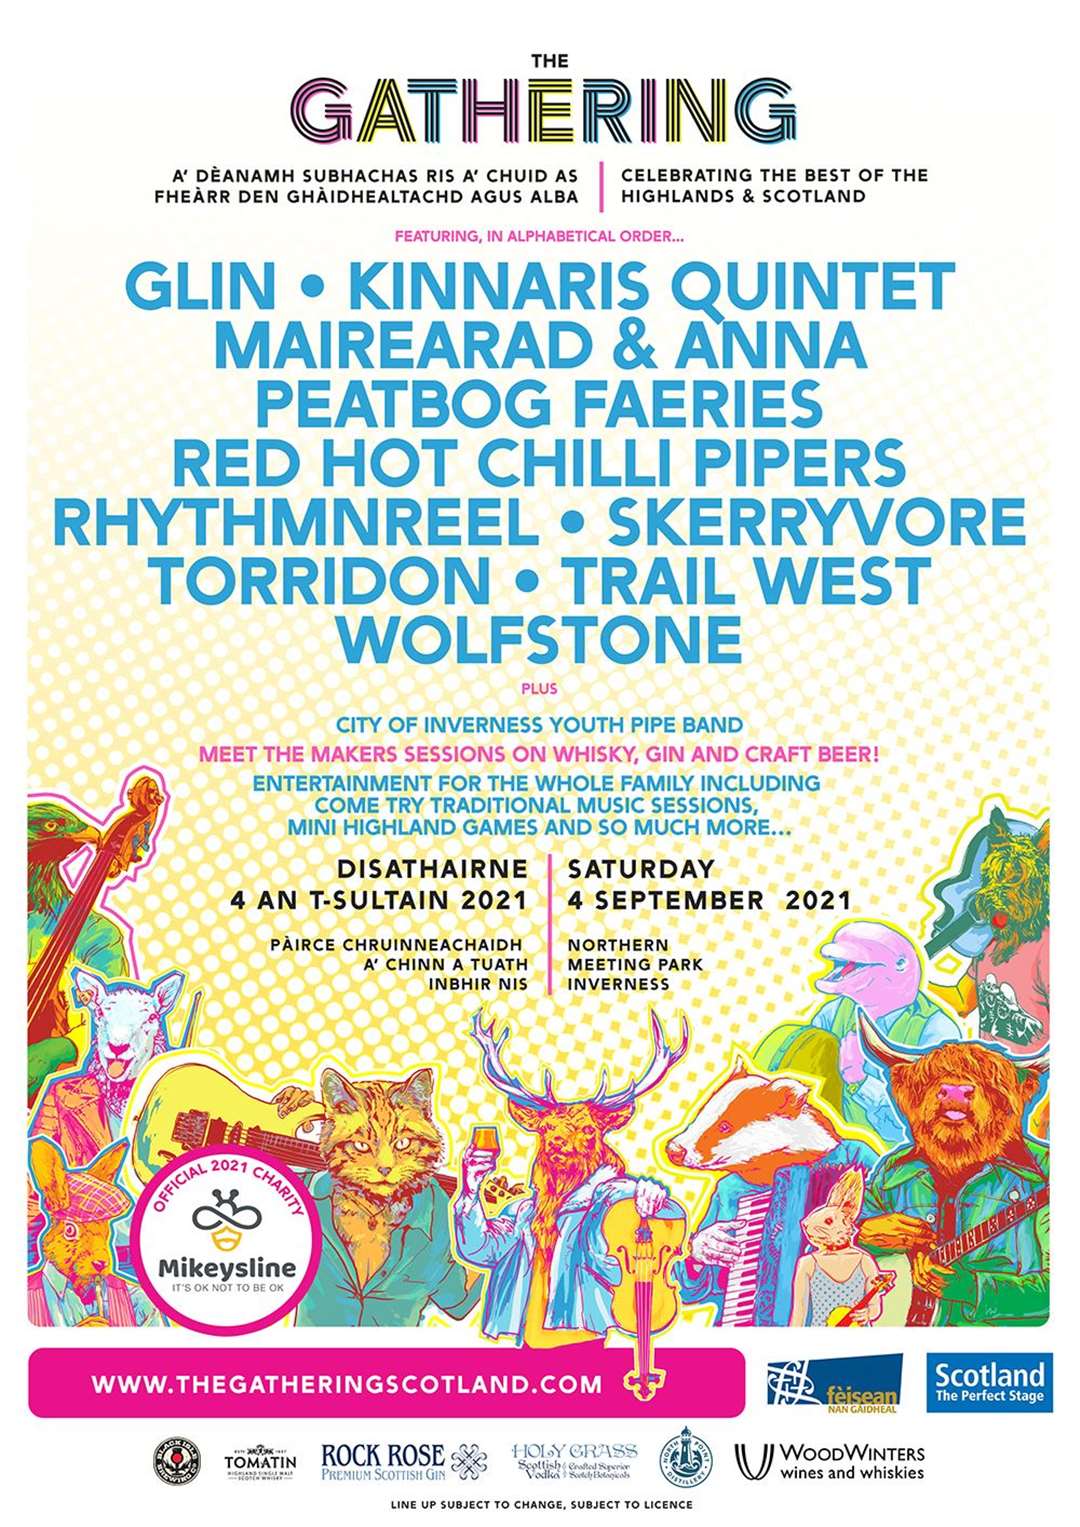 The line-up of acts for this year's Gathering Festival.